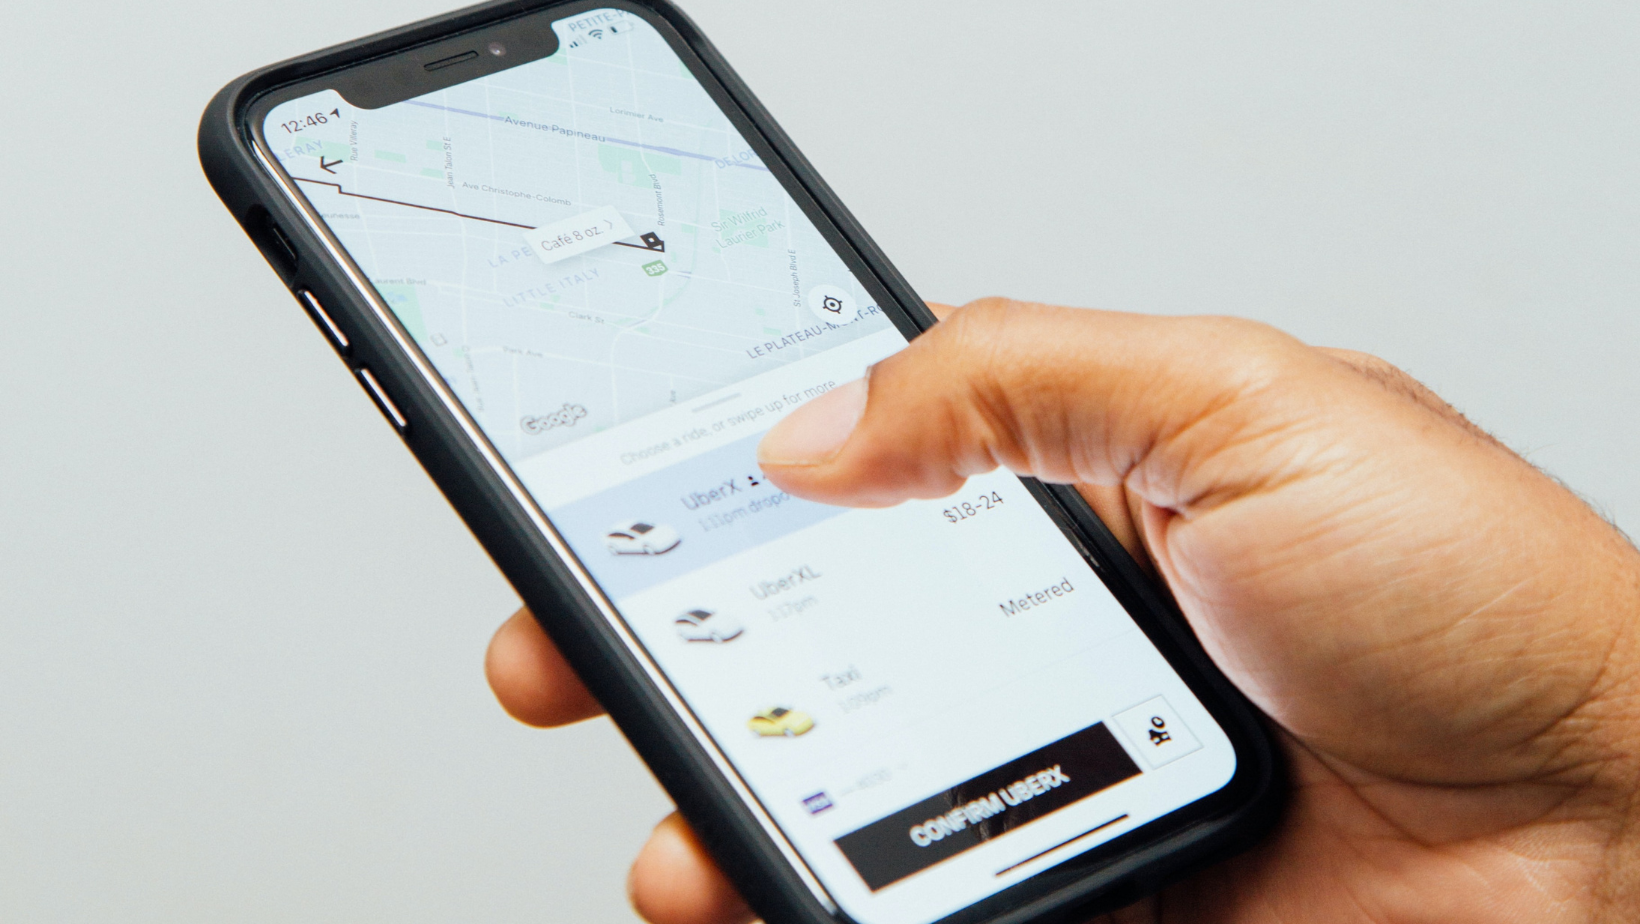 Uber Avoids Criminal Charges by Admitting to Data Breach Cover-Up